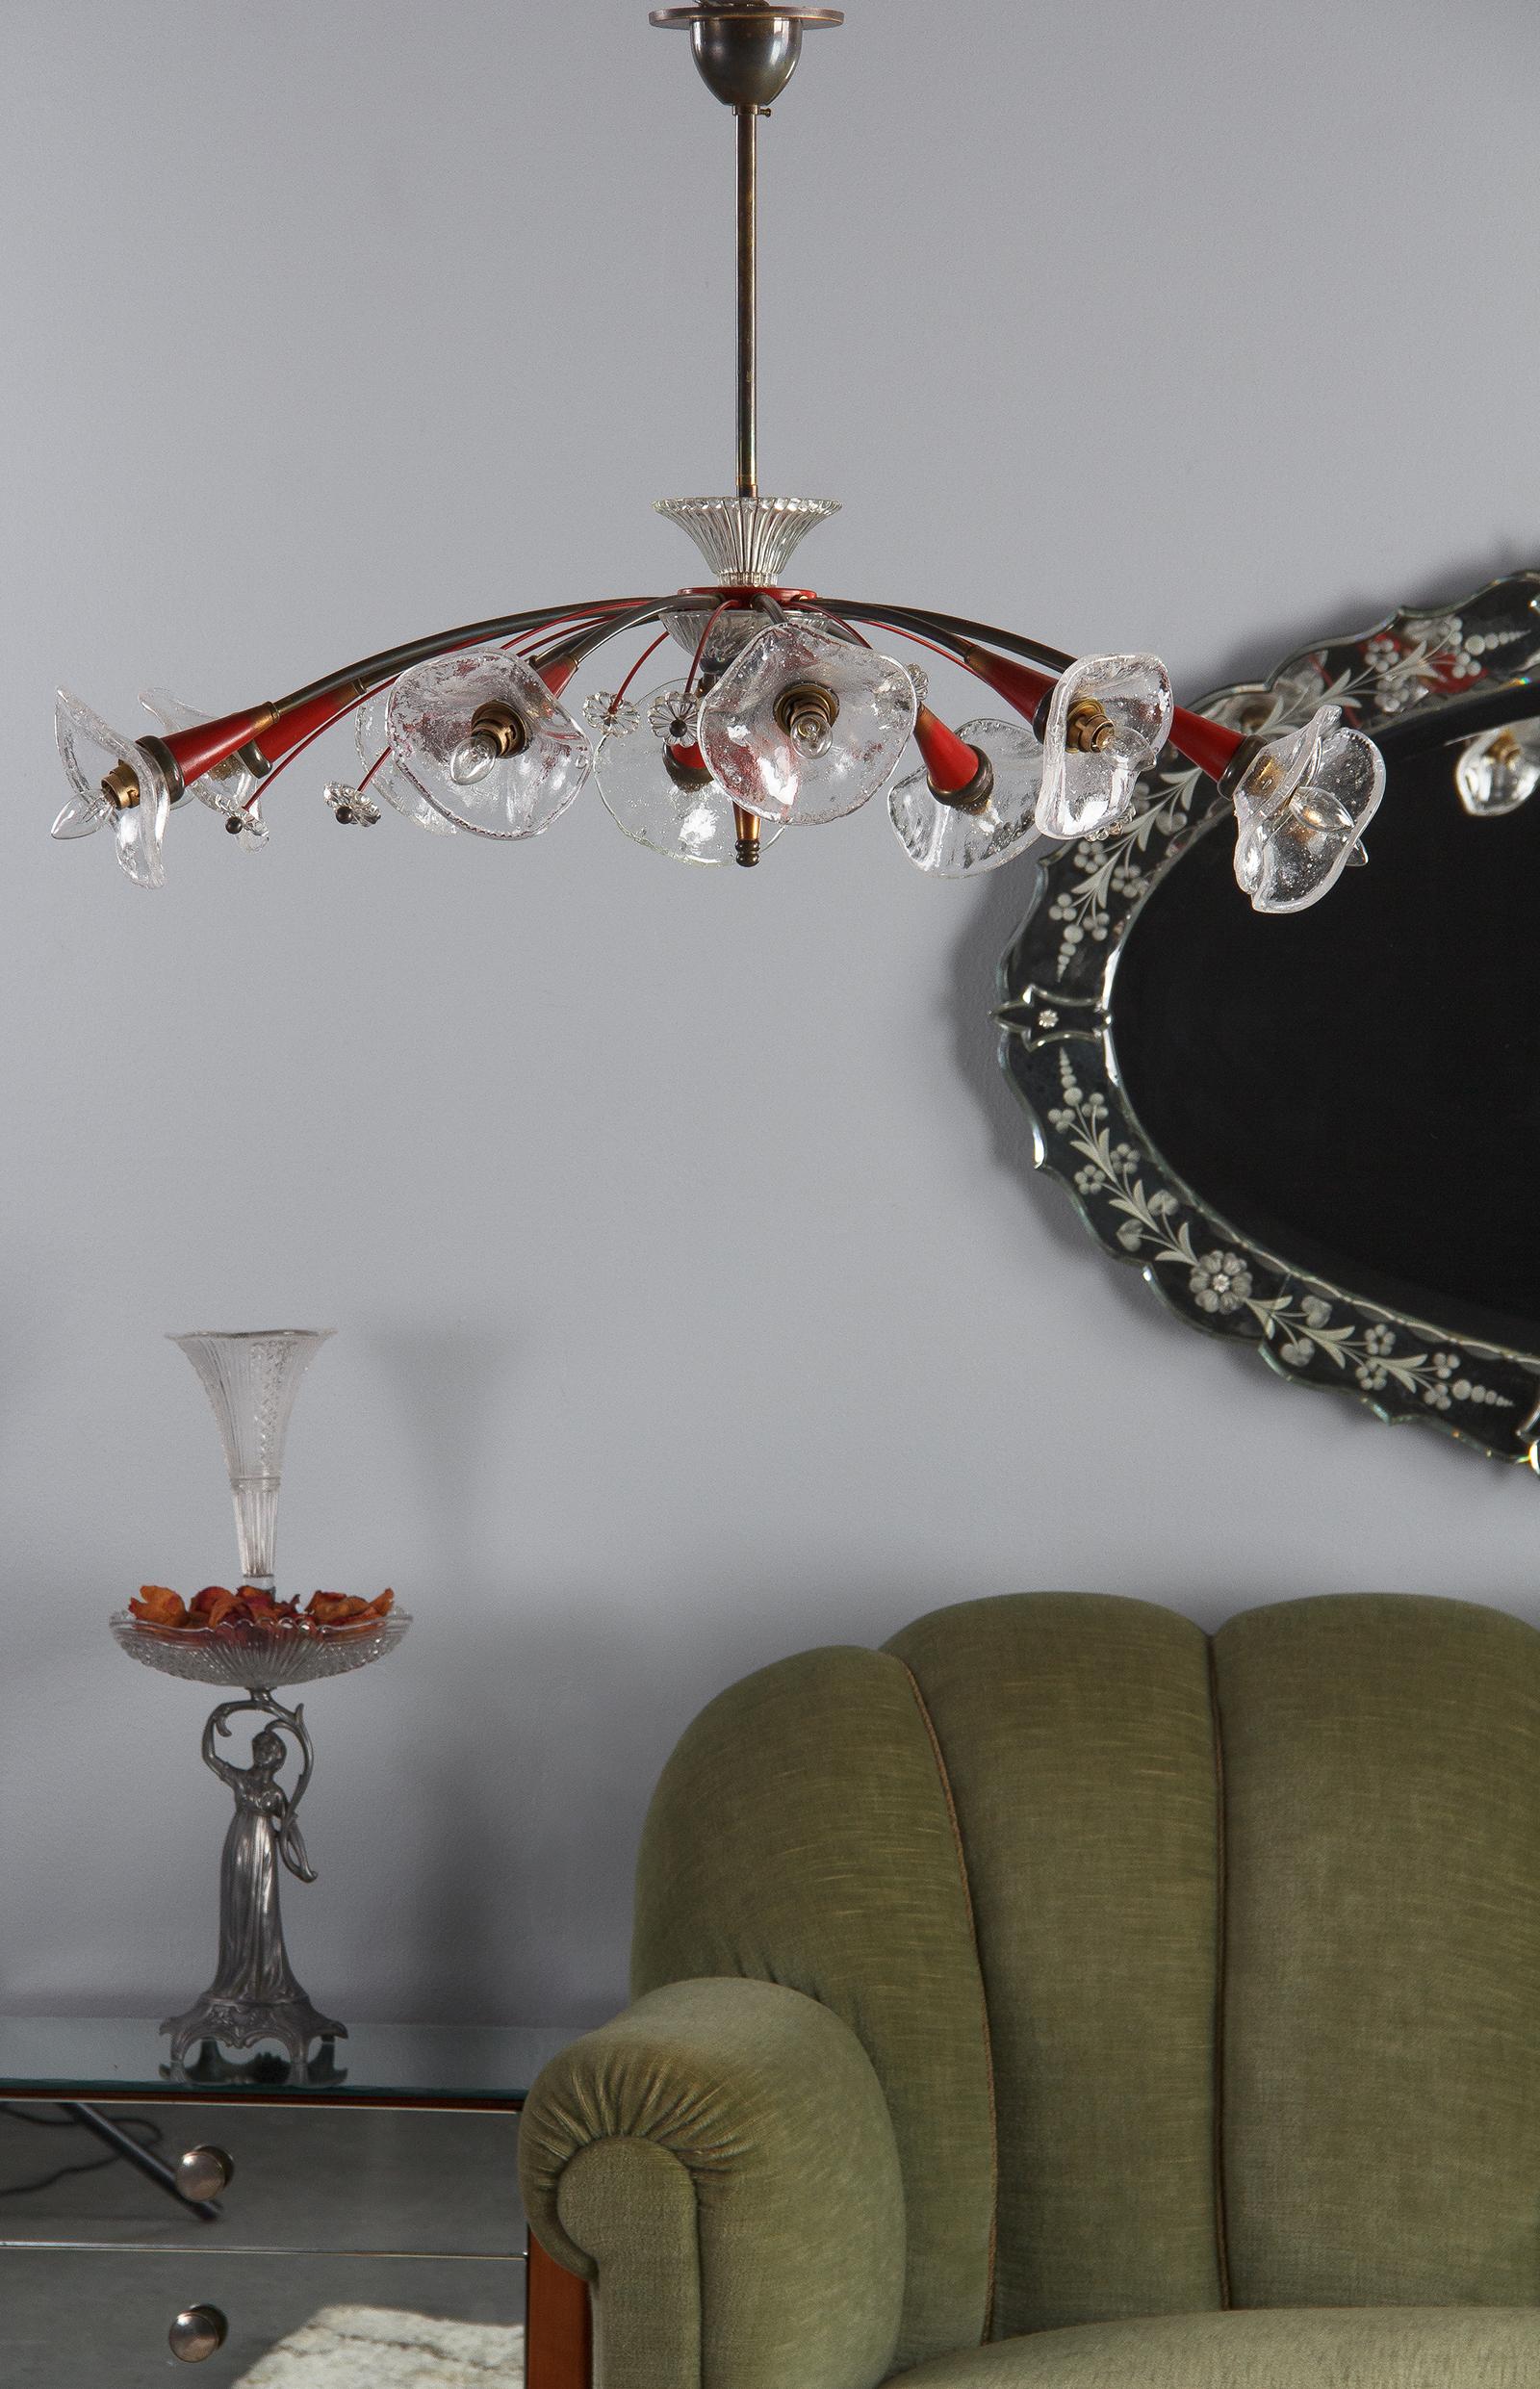 A fabulous vintage metal and glass chandelier by Lunel, midcentury French. A spray of ten black arms shoot out from the centre in an oval shape, each with a painted red bulb mount holding a blown glass bulb cover and a small candelabra bulb. The